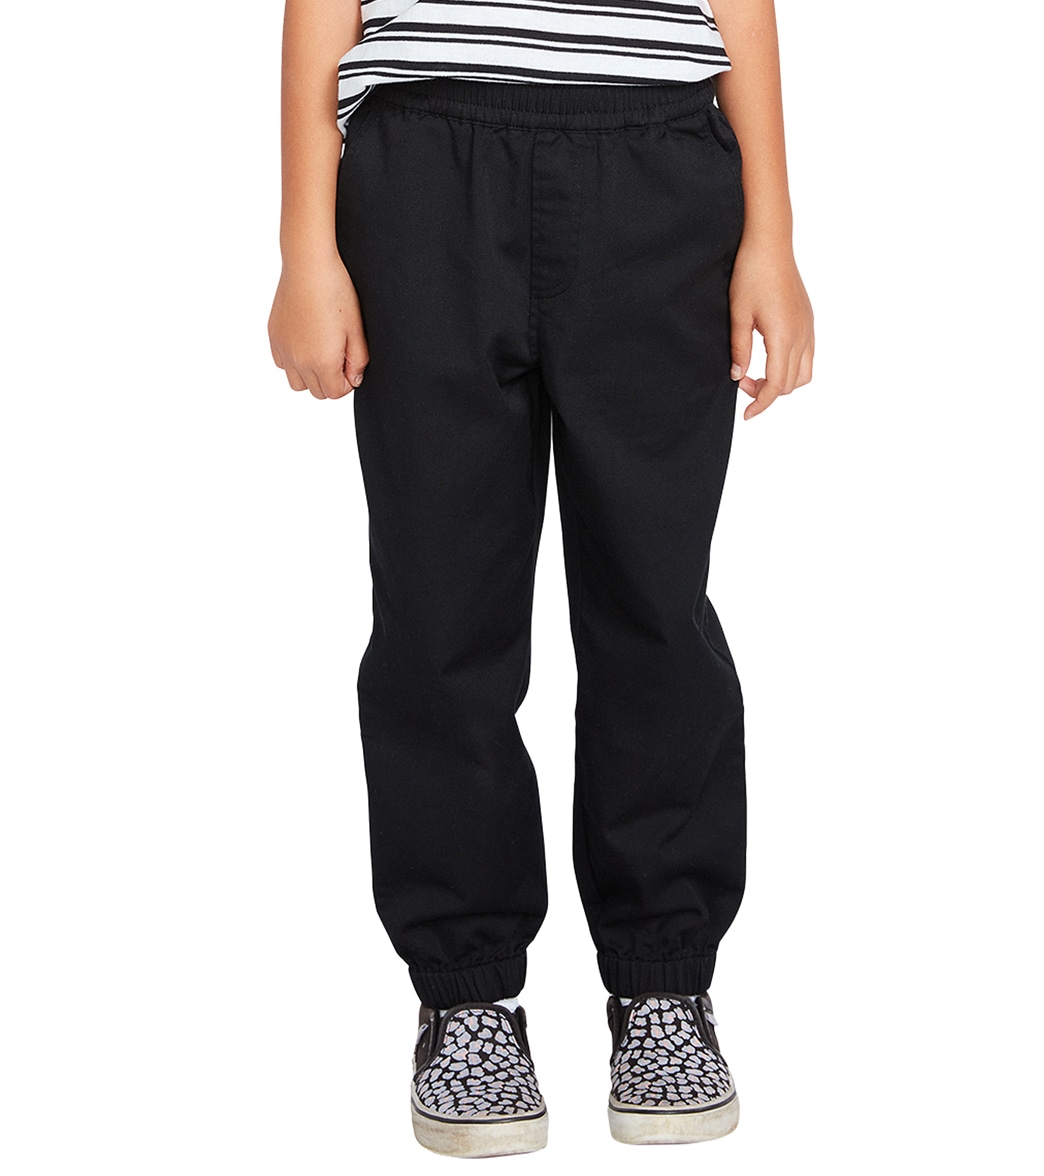 Volcom Girls' Frochickie Jogger Pants Big Kid - Black Large Cotton/Polyester - Swimoutlet.com